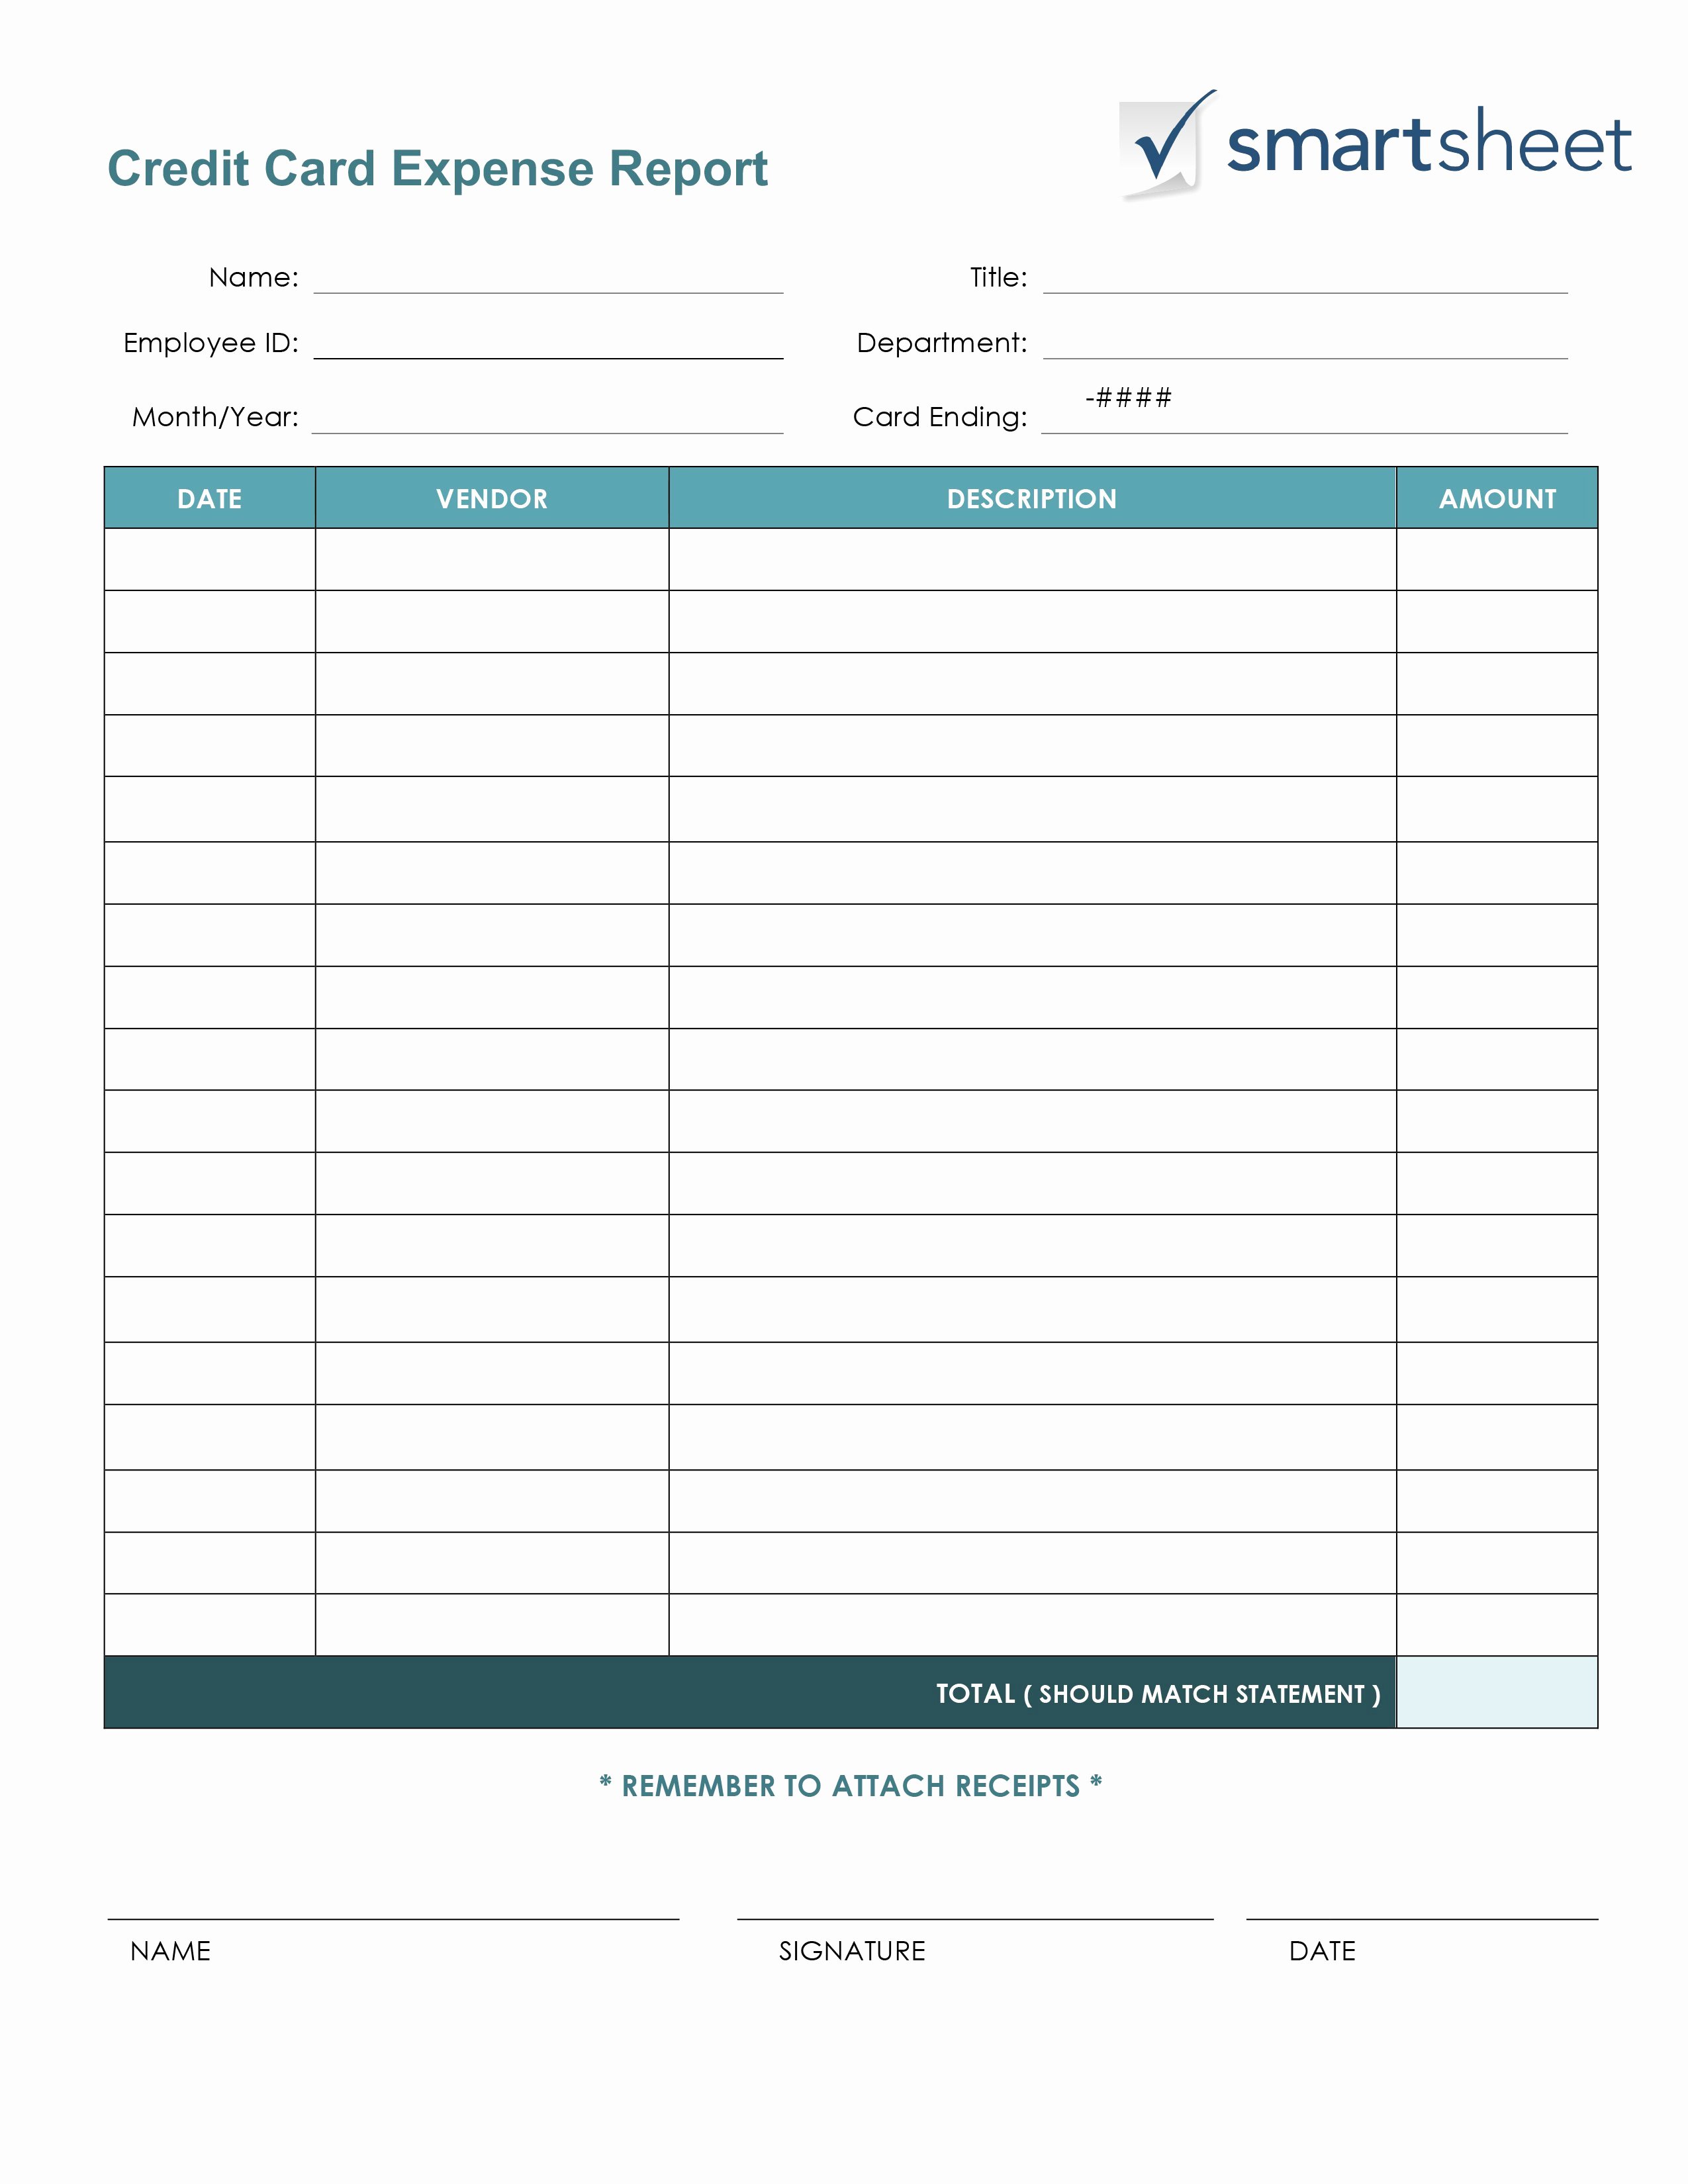 Income Expense Report Template Best Of Free Expense Report Templates Smartsheet